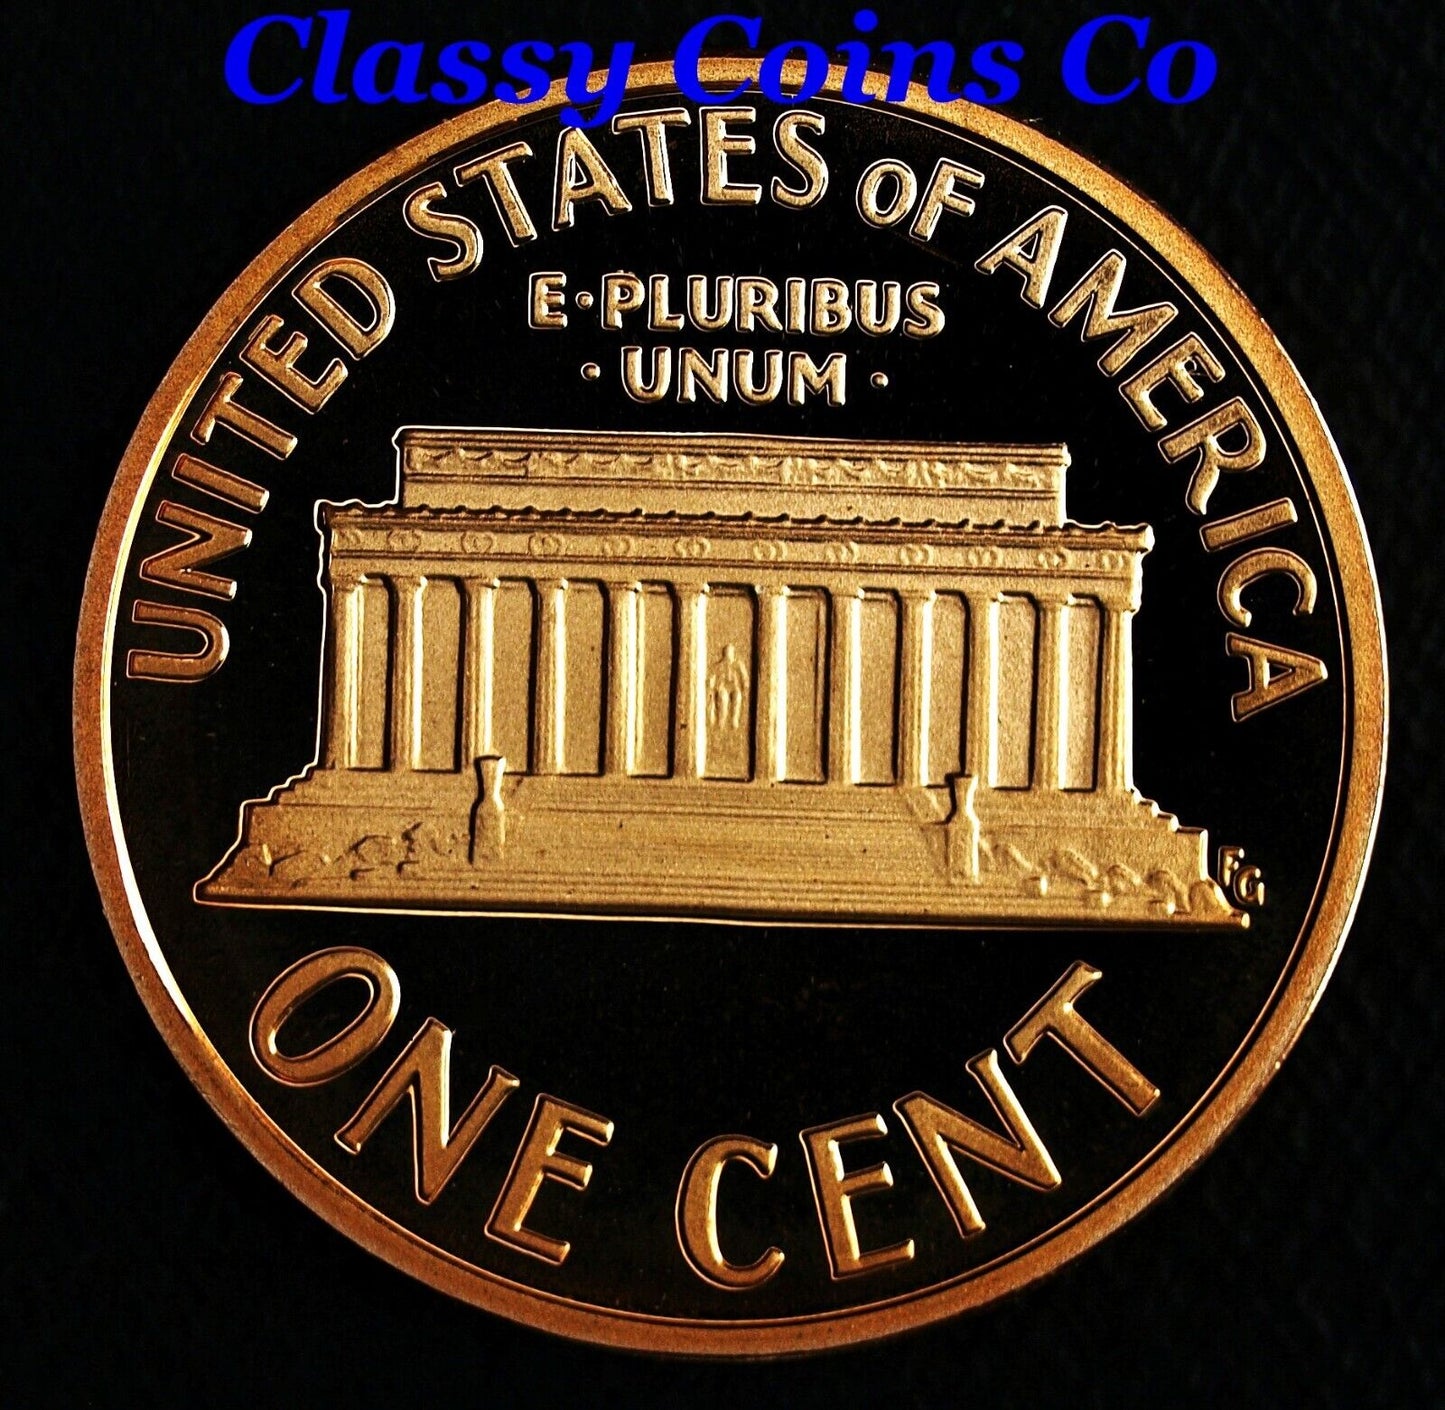 1997 S Proof Lincoln Cent ☆☆ Deep Mirrors ☆☆ Fresh From Proof Set ☆☆